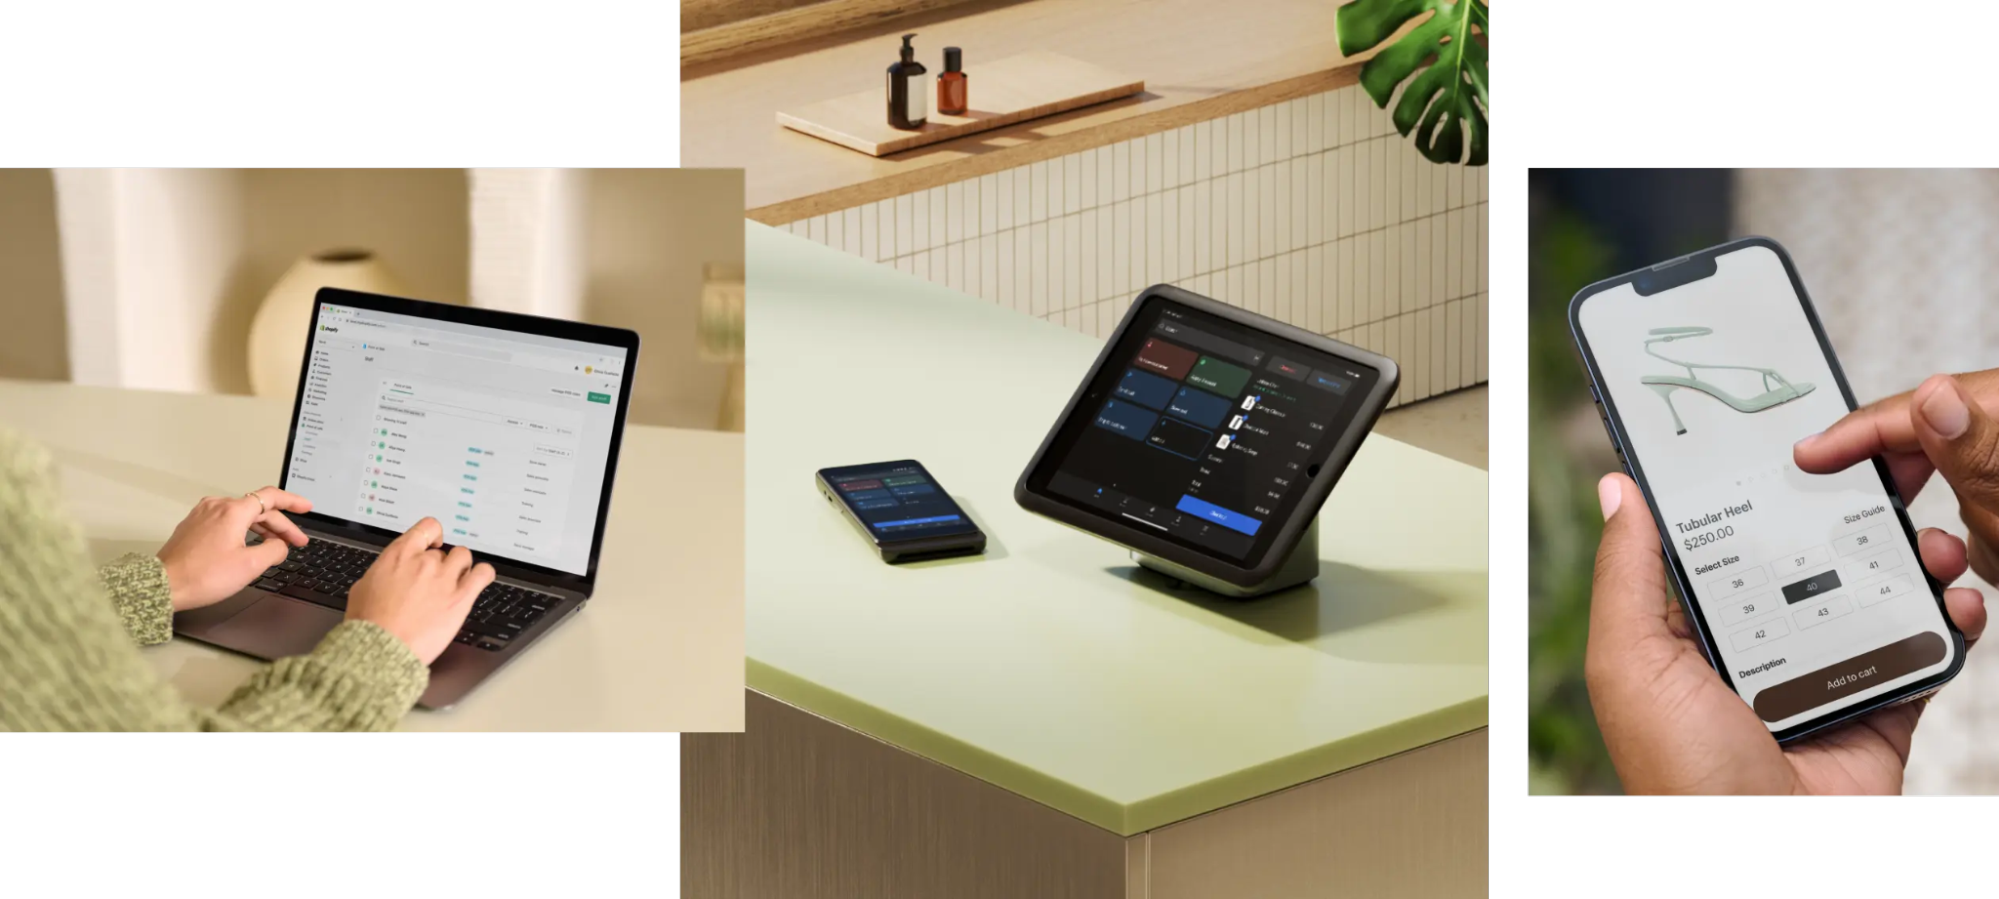 Three images of Shopify POS, someone using it on a laptop (left); tablet and mobile POS on counter (center); mobile POS app (right)